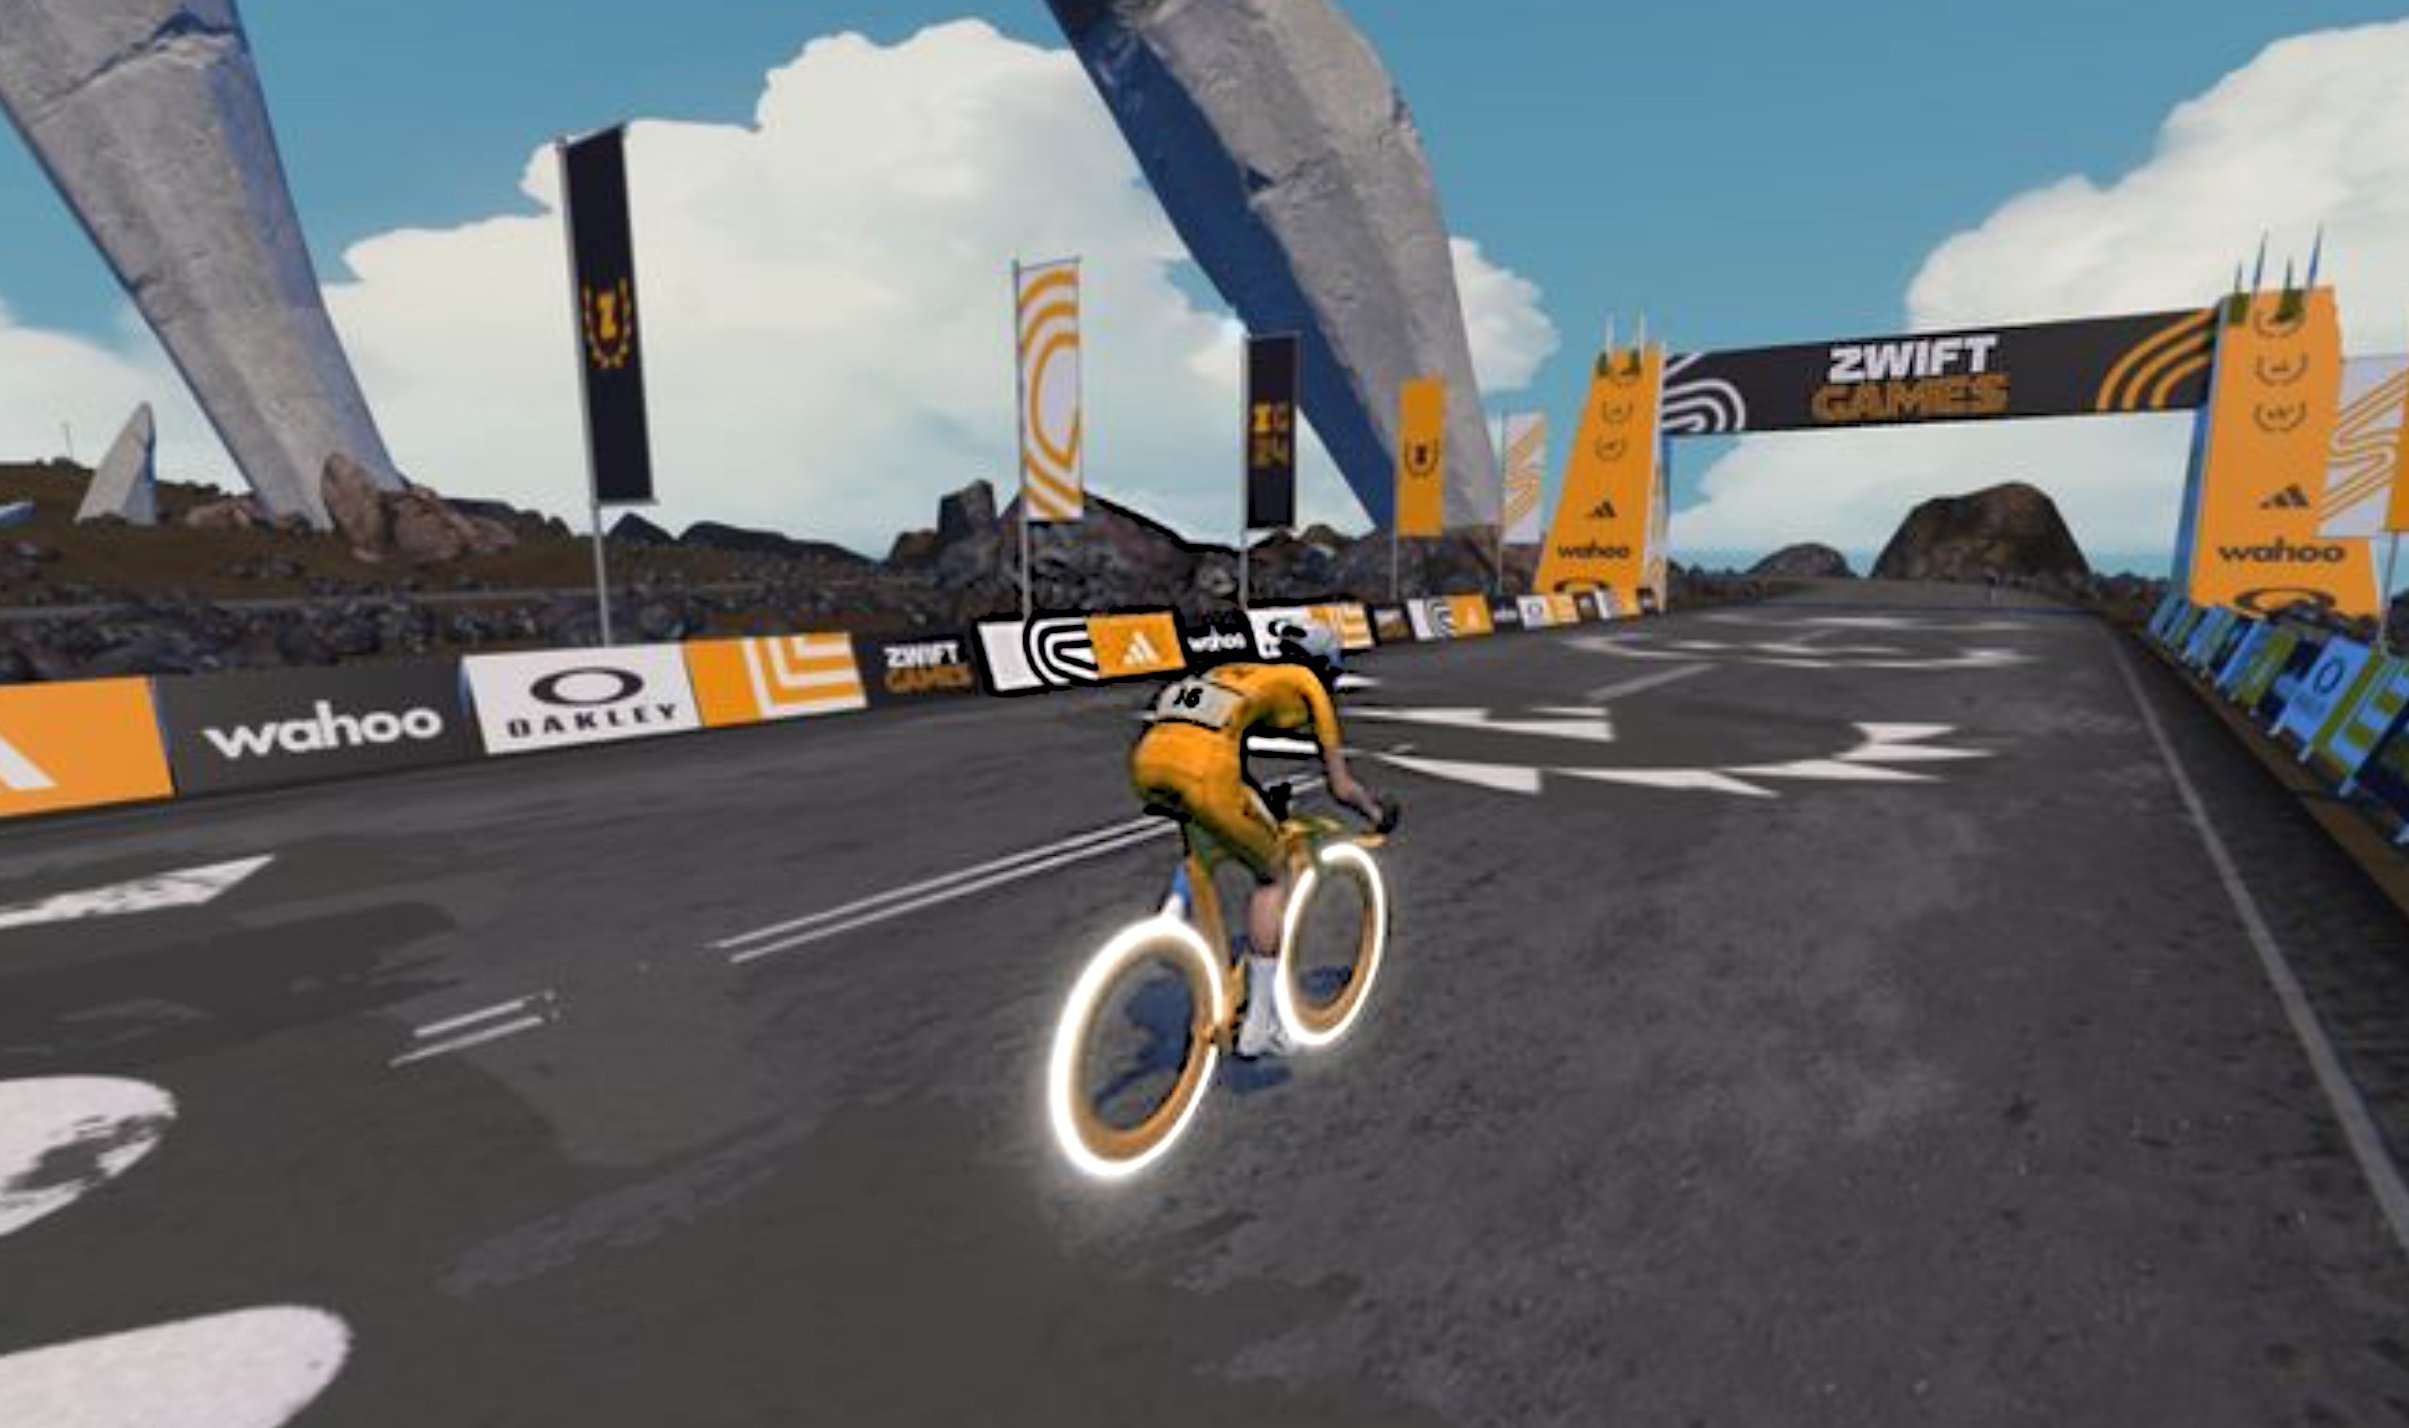 Zwift Games Hailed as the Biggest eSports Event in History